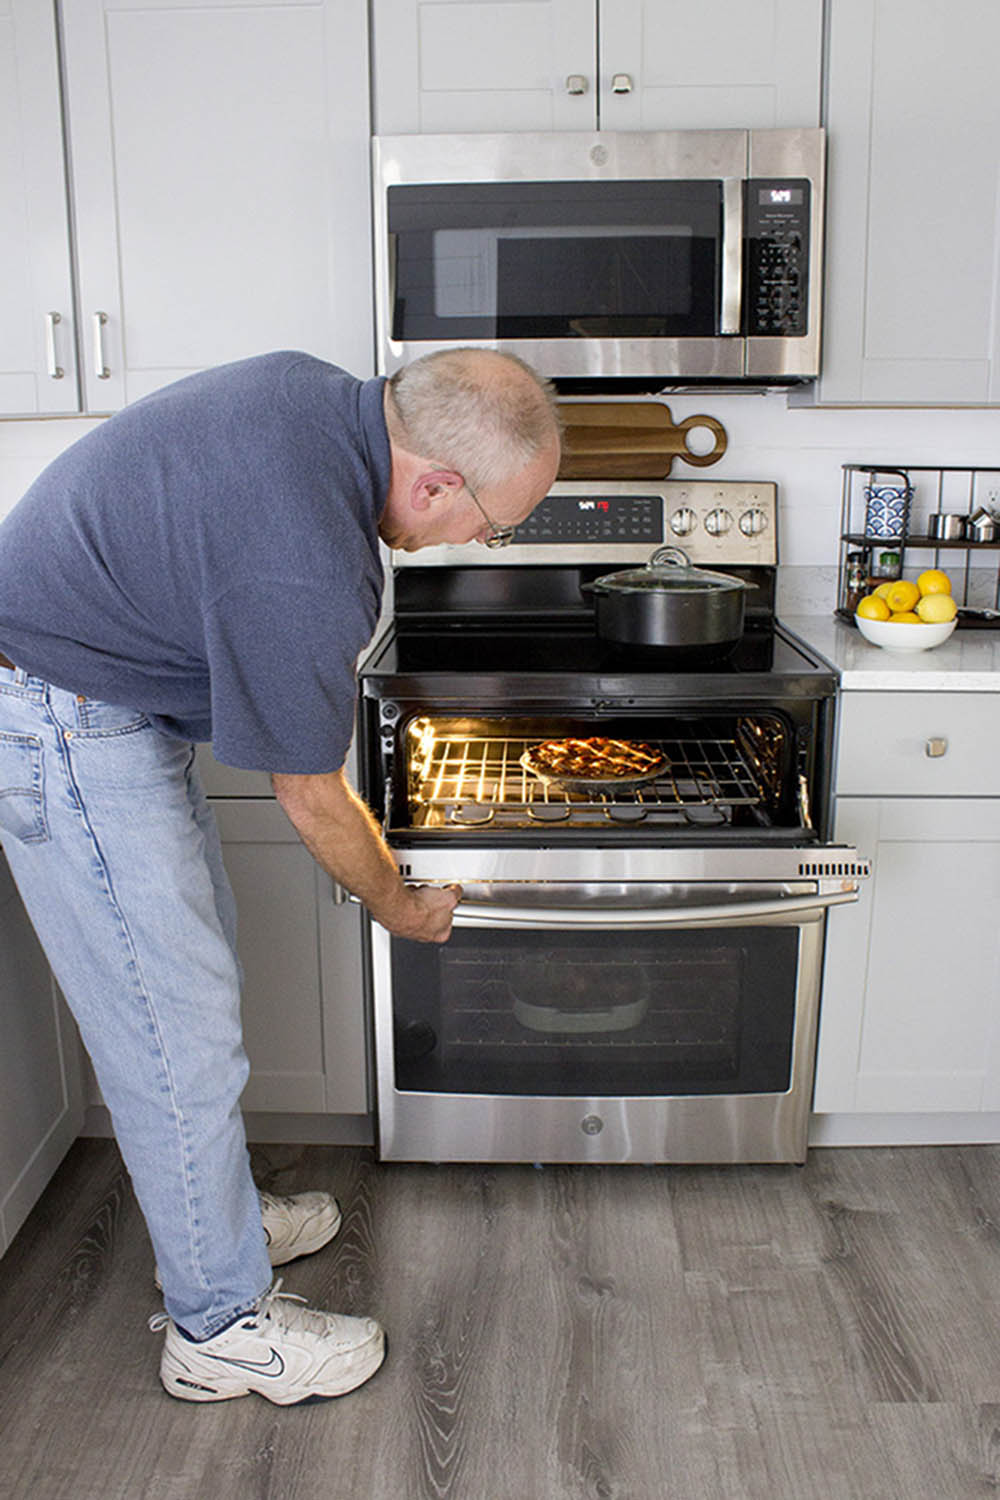 A man opens up the top oven on a double oven.